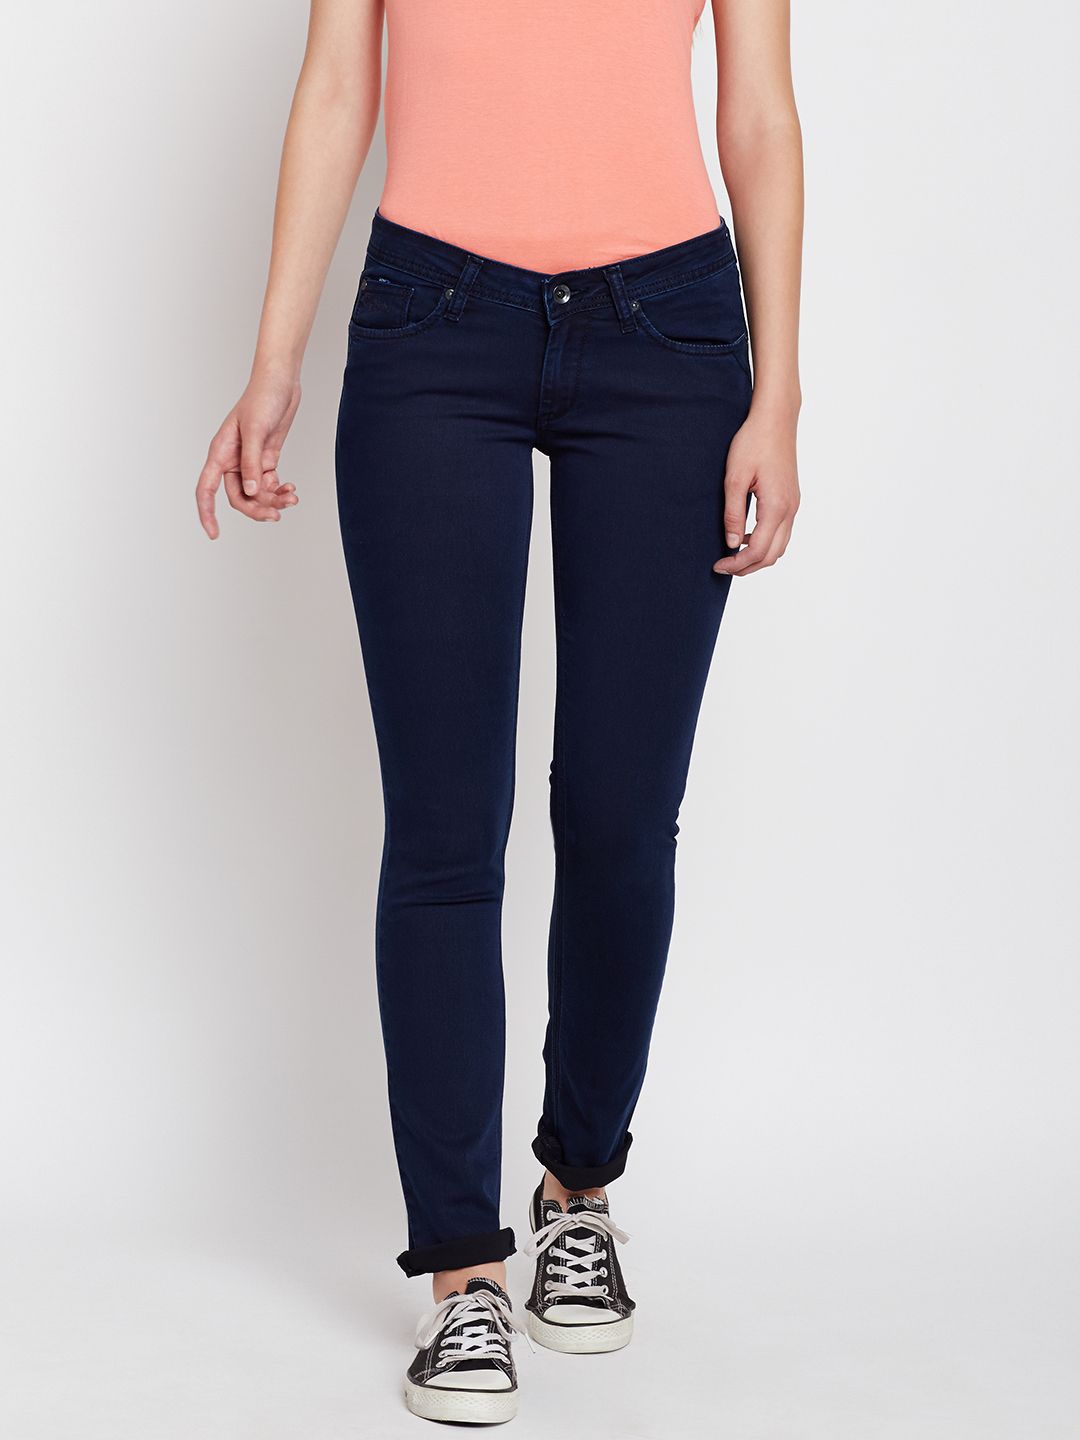 Pepe Jeans Women Navy Frisky Slim Fit Low-Rise Clean Look Stretchable Jeans Price in India